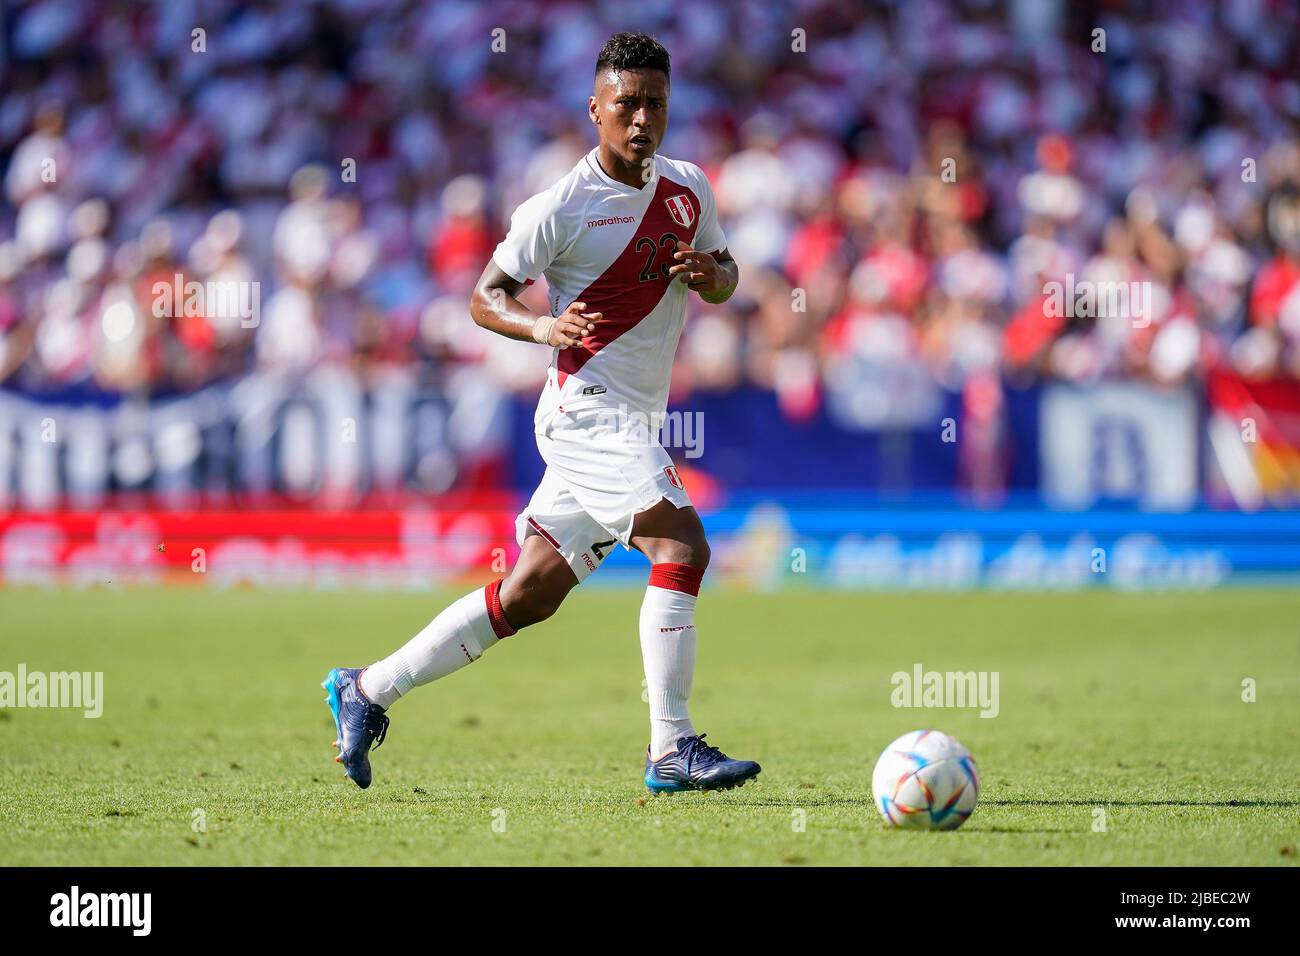 Barcelona, Spain. June 5, 2022, Santiago Ormeno of Peru during the friendly match between Peru and New Zealand played at RCDE Stadium on June 5, 2022 in Barcelona, Spain. (Photo by Bagu Blanco / PRESSINPHOTO) Stock Photo